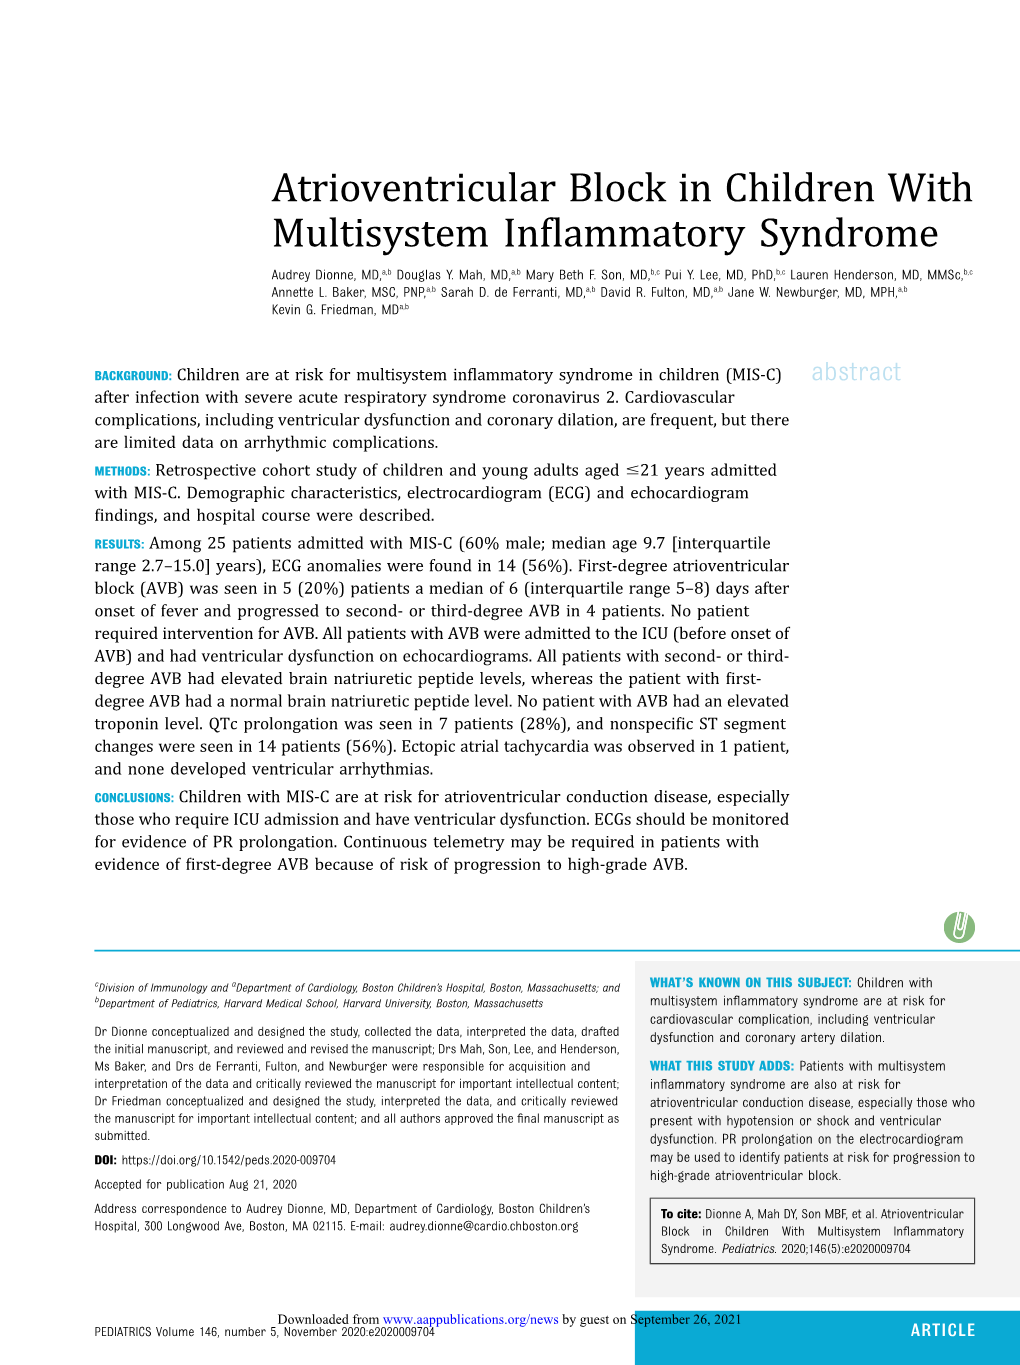 Atrioventricular Block in Children with Multisystem Inflammatory Syndrome Audrey Dionne, Douglas Y